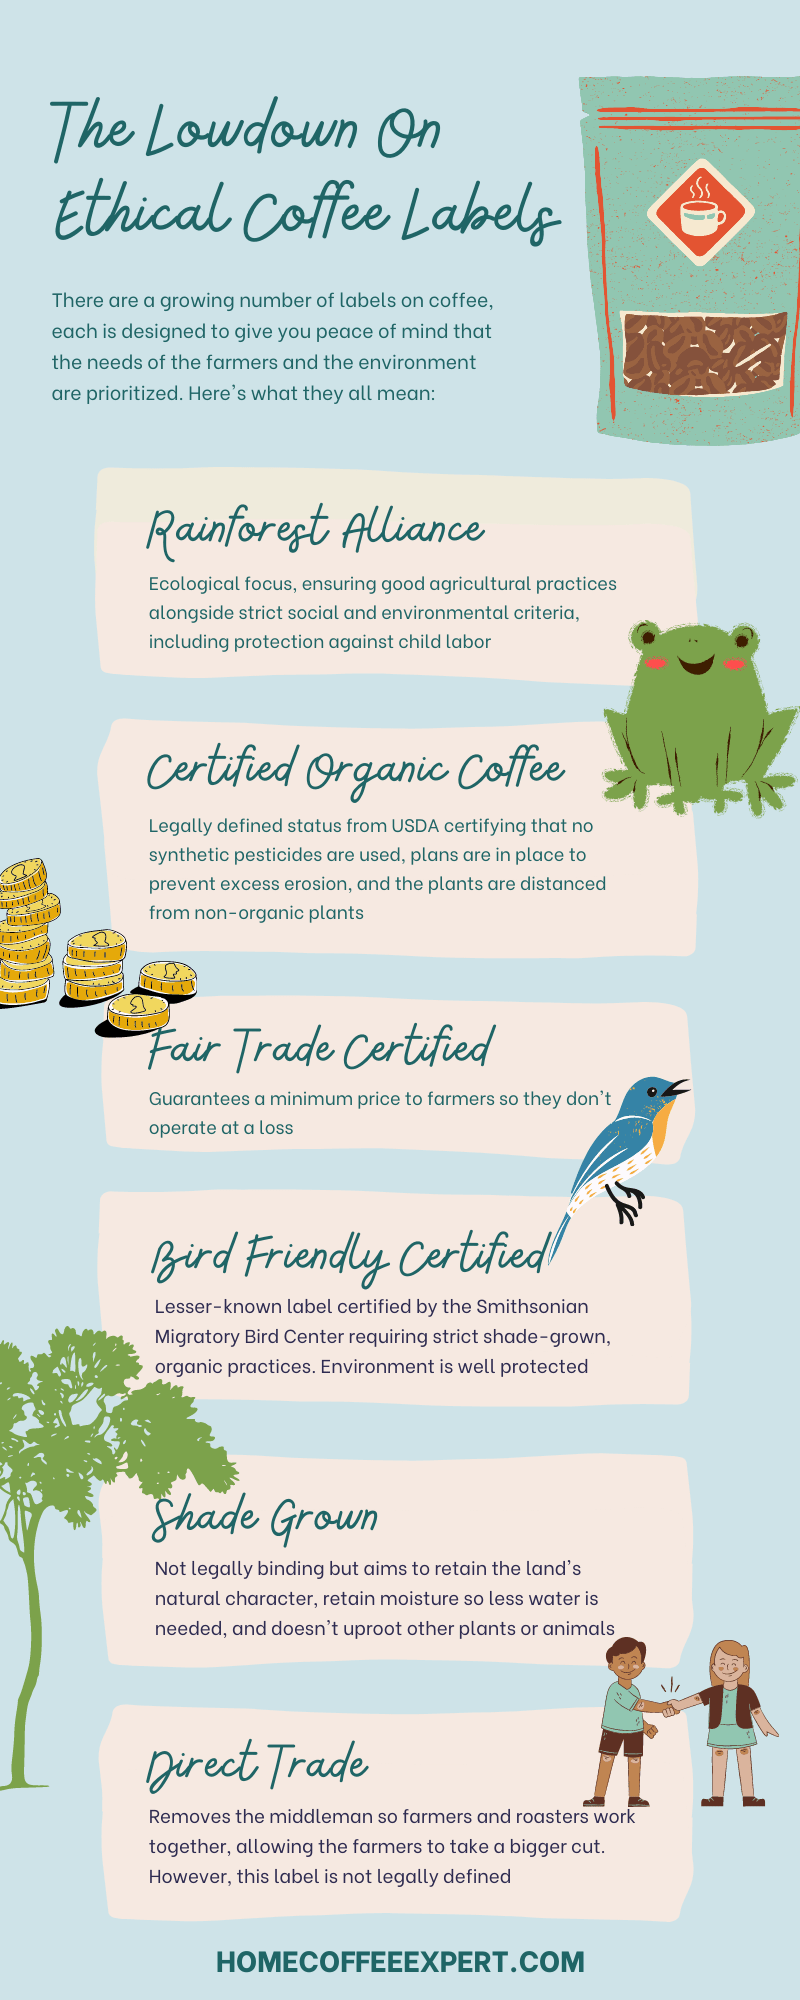 Get the lowdown on the main ethical, sustainable coffee labels in this infographic